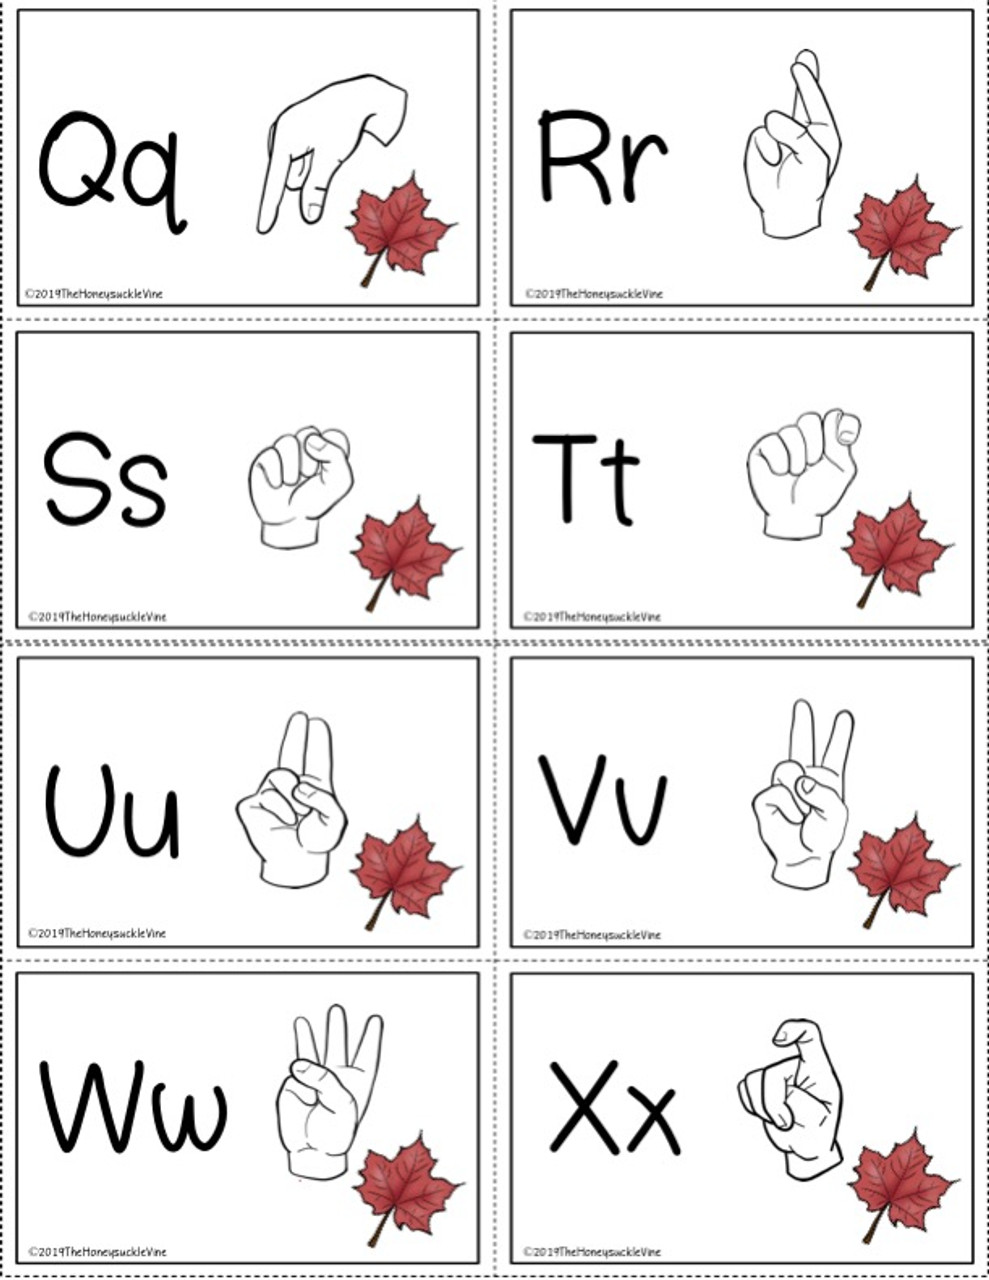 Alphabet cards
(4th page not shown here)